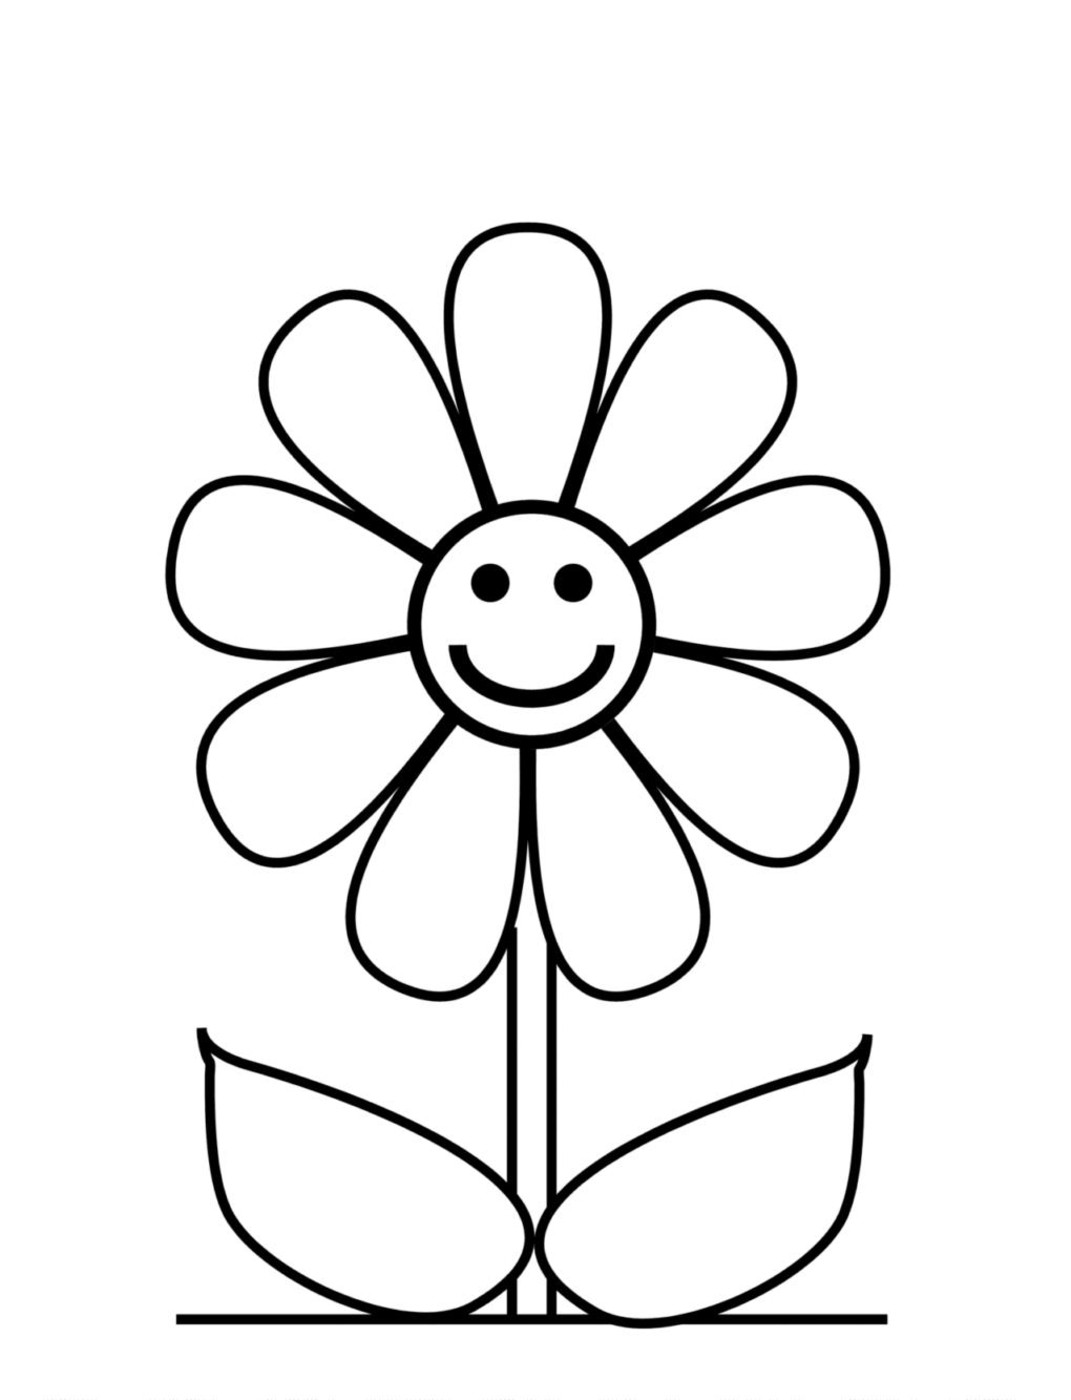  Happy flower coloring pages flower coloring pages 2 flower coloring pages 3